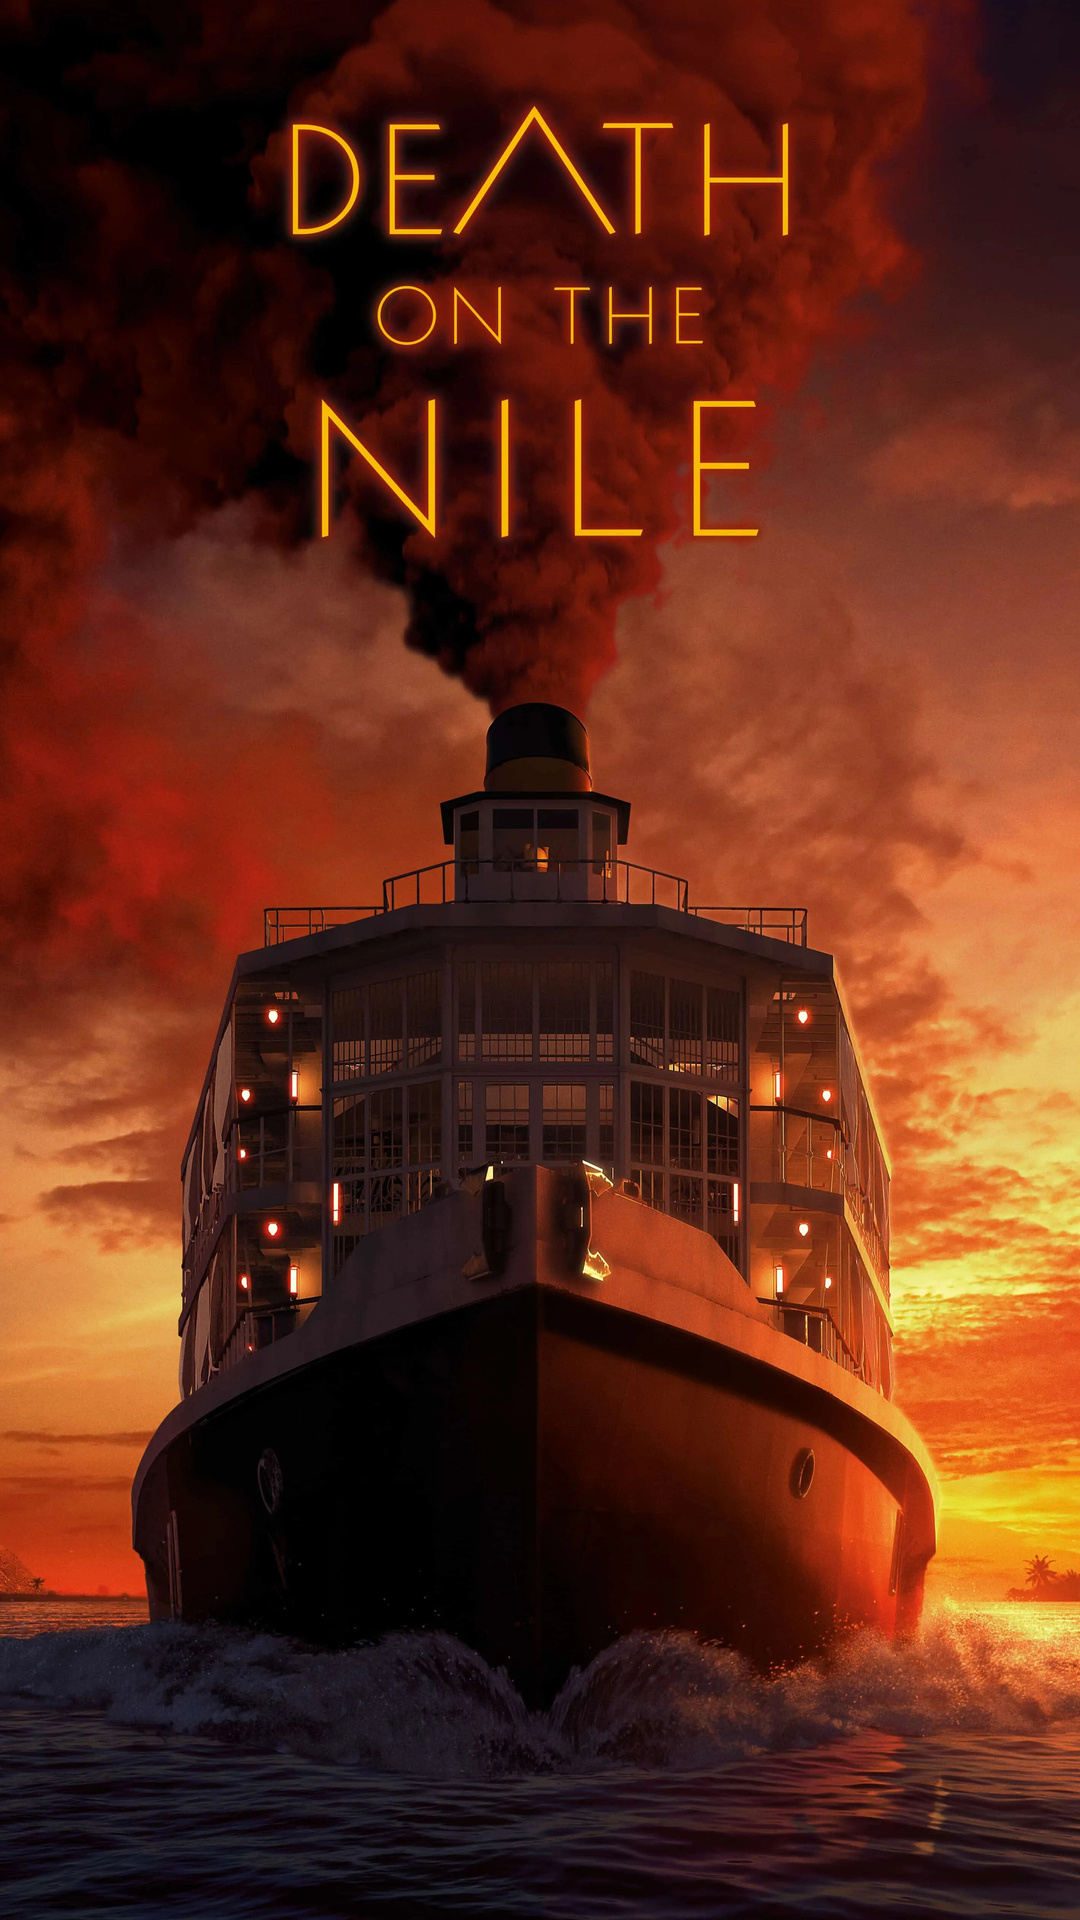 Death on the Nile, iPhone wallpapers, High definition, Stunning imagery, 1080x1920 Full HD Handy